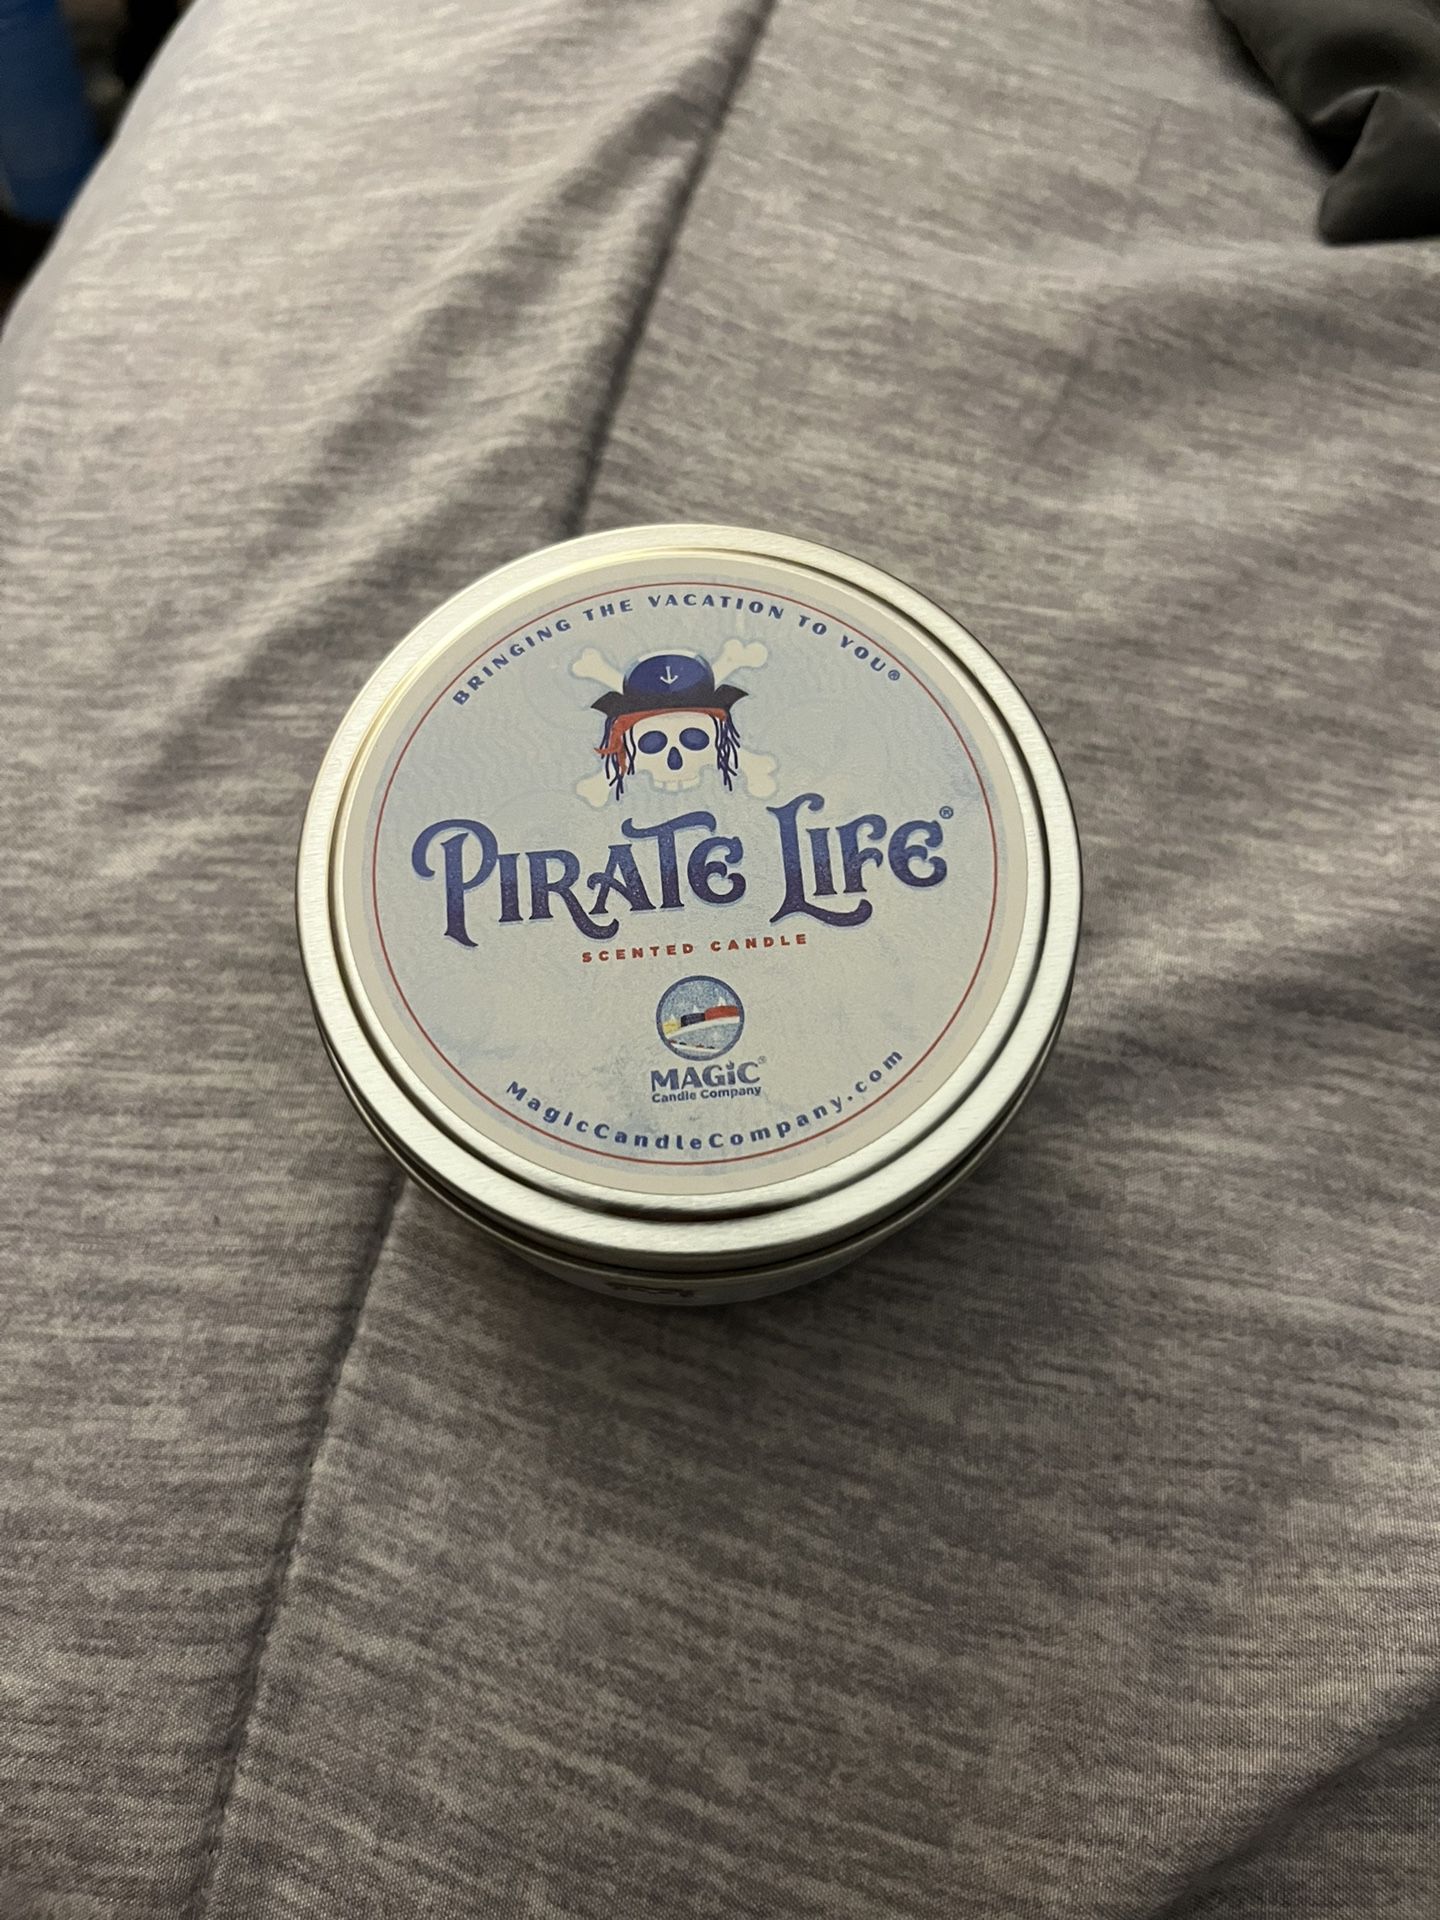 Pirates Life Scent Candle 